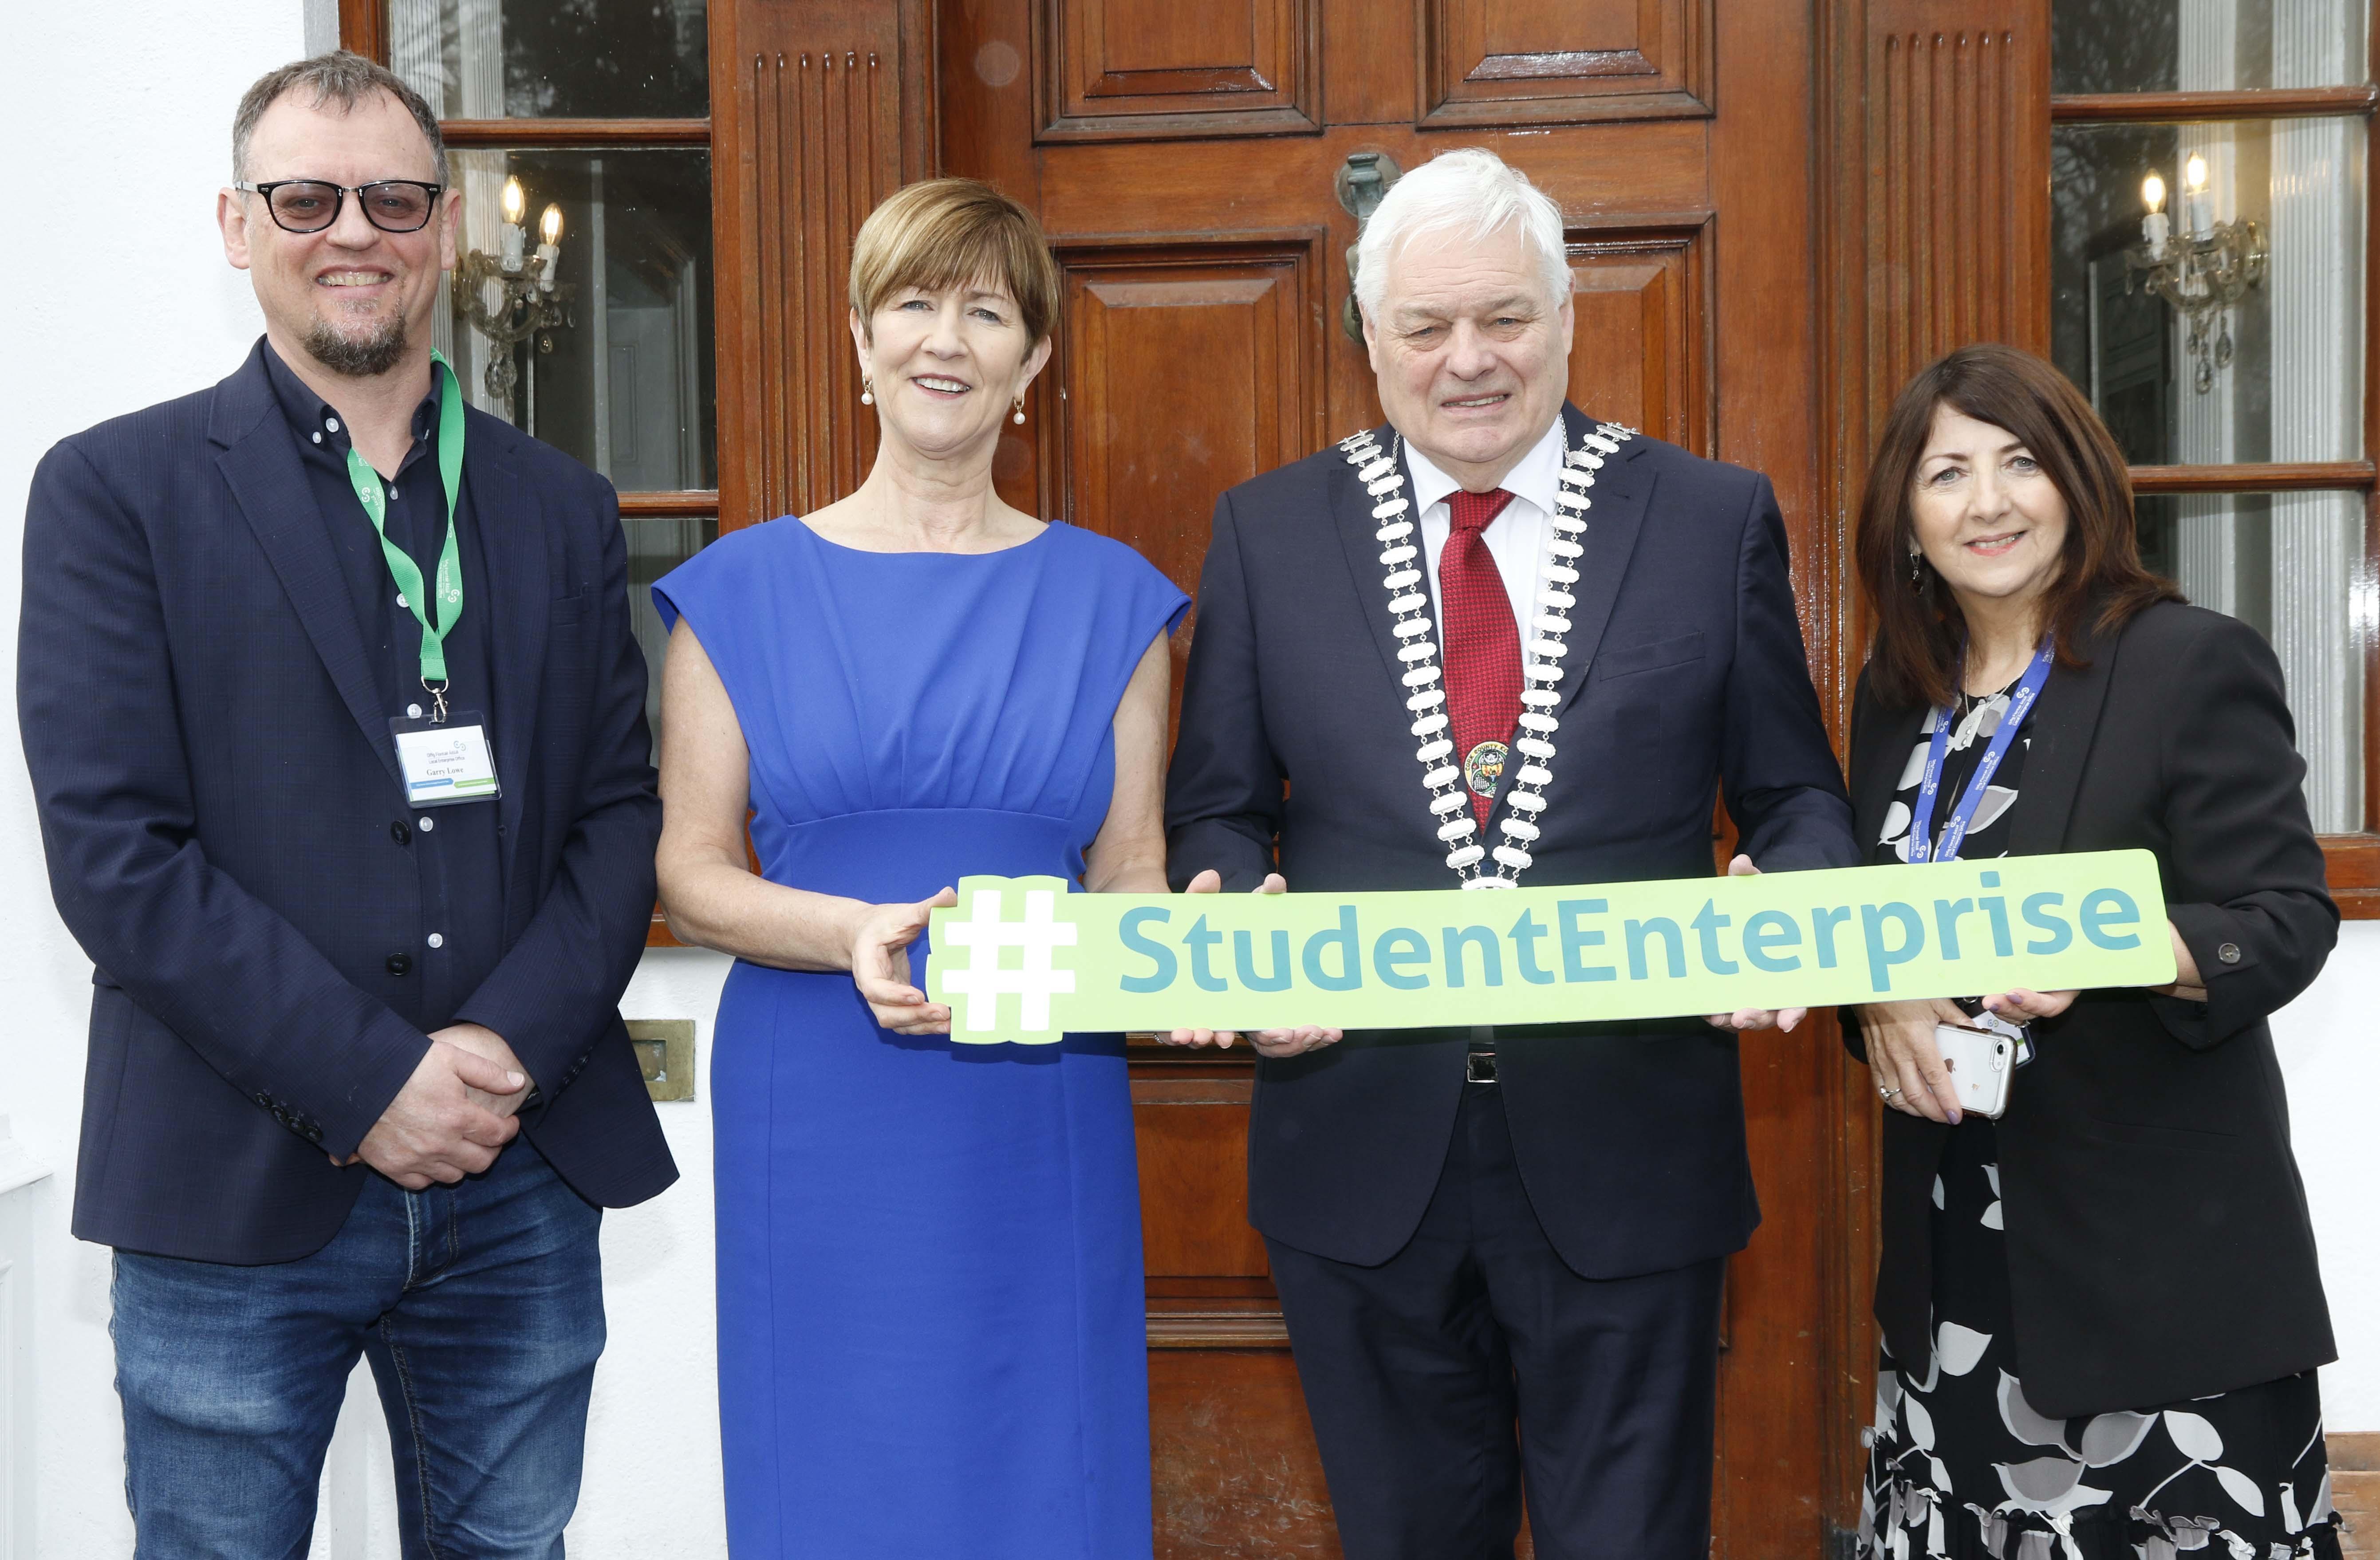 Gary Lowe, Programme Co-Ordinator Student Enterprise Programme, Sharon Corcoran, Director of Services, Economic Development, Enterprise and Tourism, Cork County Council, Cllr Frank O'Flynn Mayor of the County of Cork, and Joan Kelleher, Event Organiser, Local Enterprise Office Mallow, pictured at the Springfort Hall Hotel Mallow.